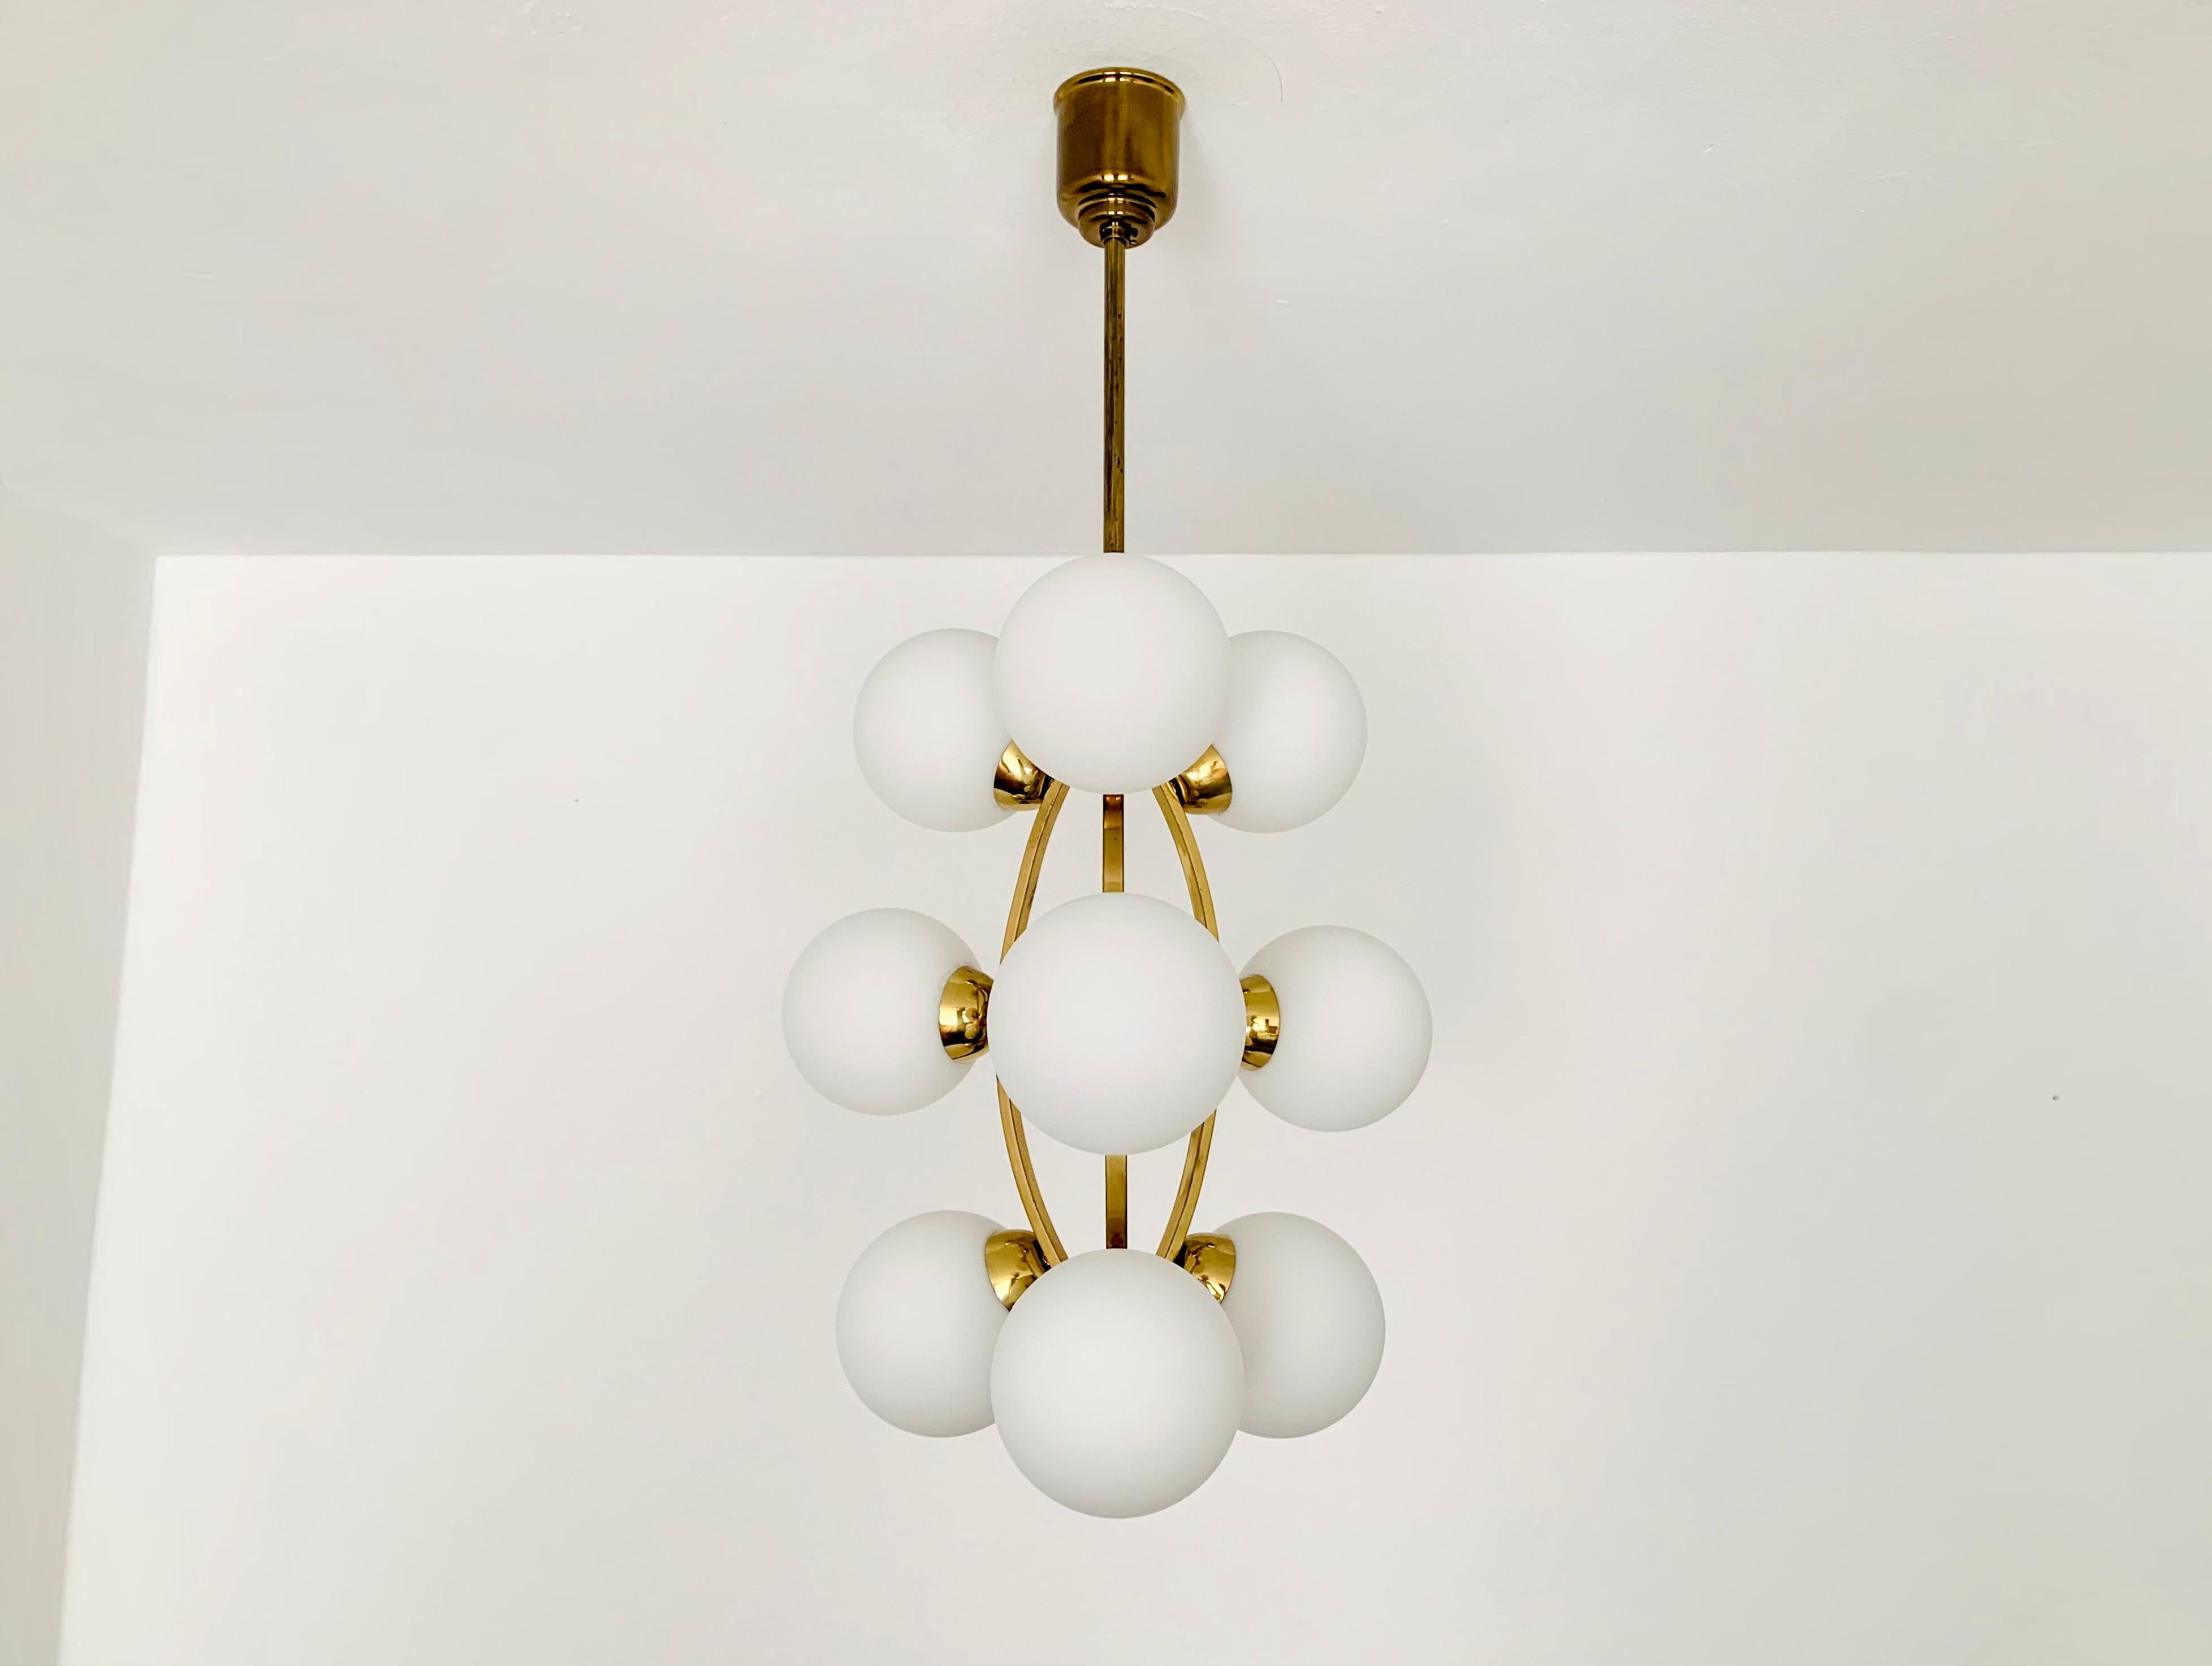 Sputnik chandelier from the 1960s.
The 9 opal glass lampshades spread a pleasant light.
The lamp has a very high quality finish.
Very contemporary design with a fantastic noble appearance.

Condition:

Very good vintage condition with slight signs